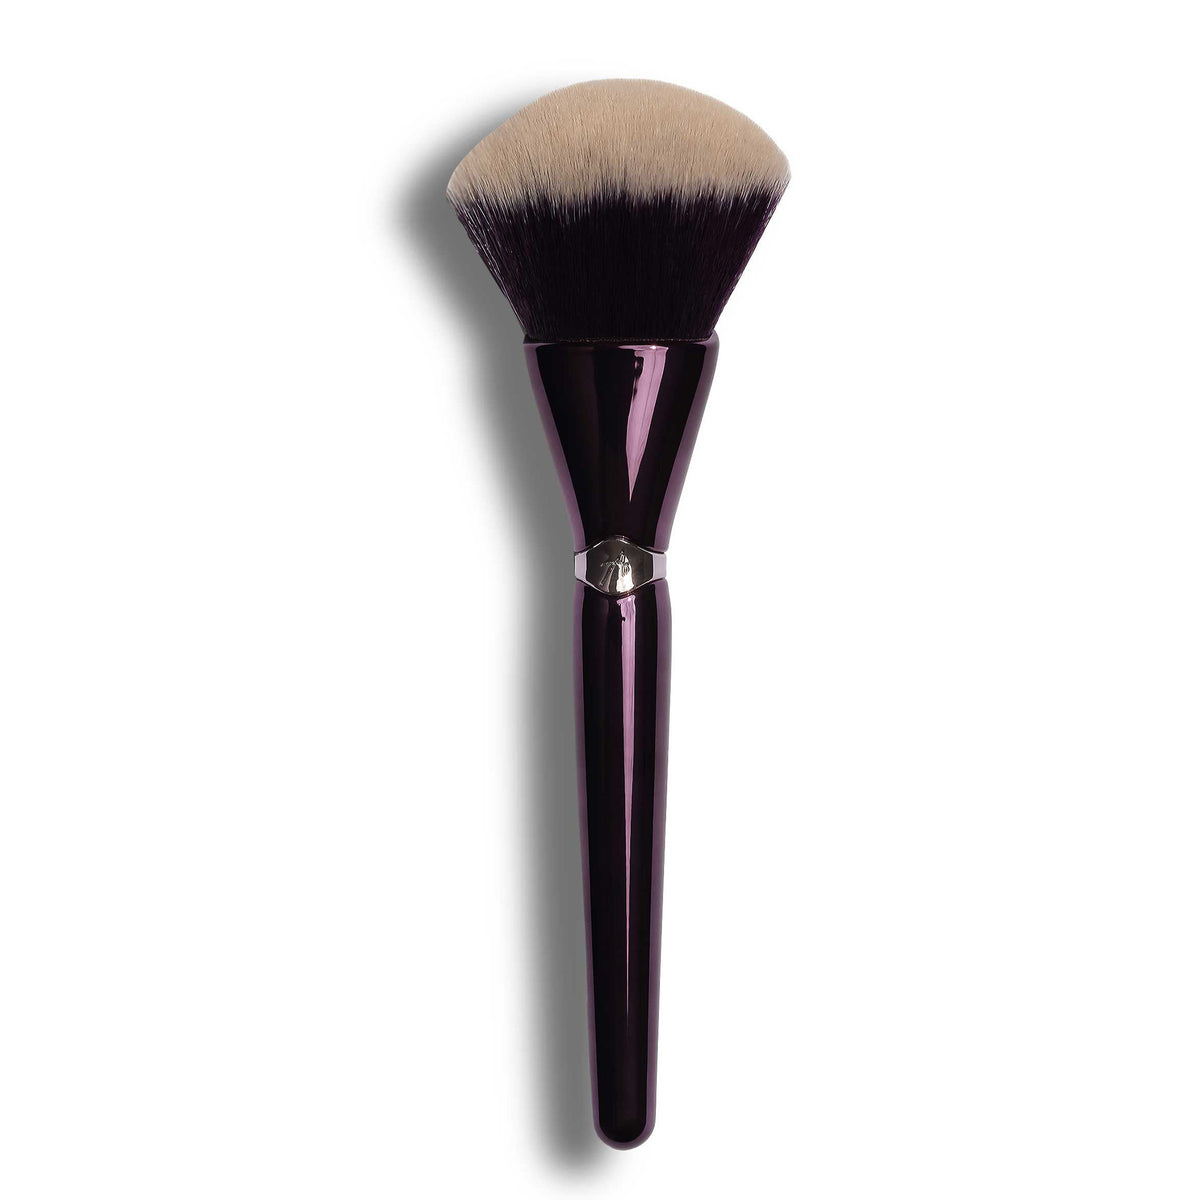 The 7 Best Makeup Brush Cleaners 2020, According to Experts